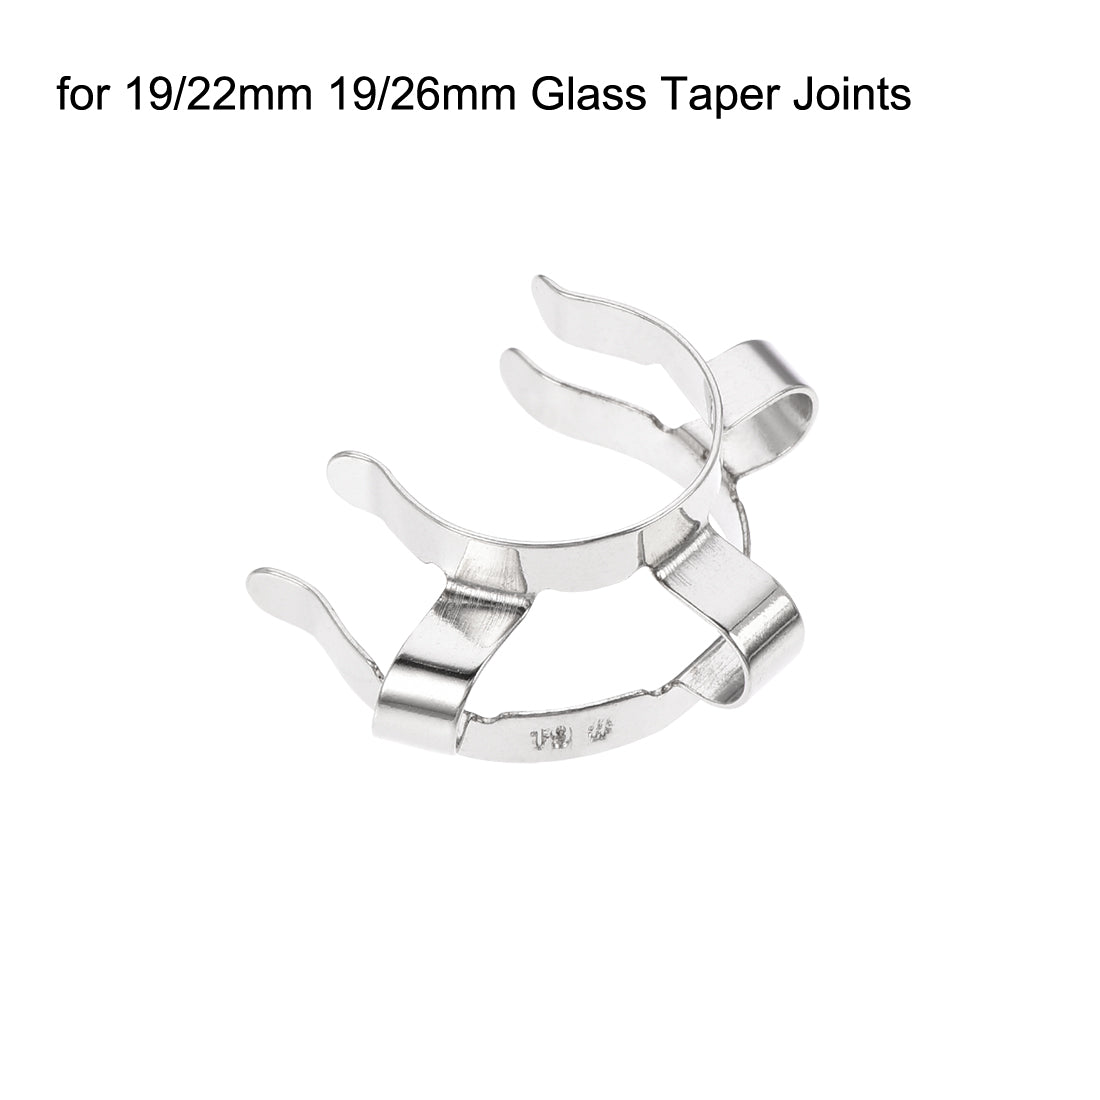 Uxcell Uxcell Joint Clip Lab Clamp Mounting Clips for 34mm Glass Taper Joints 3Pcs